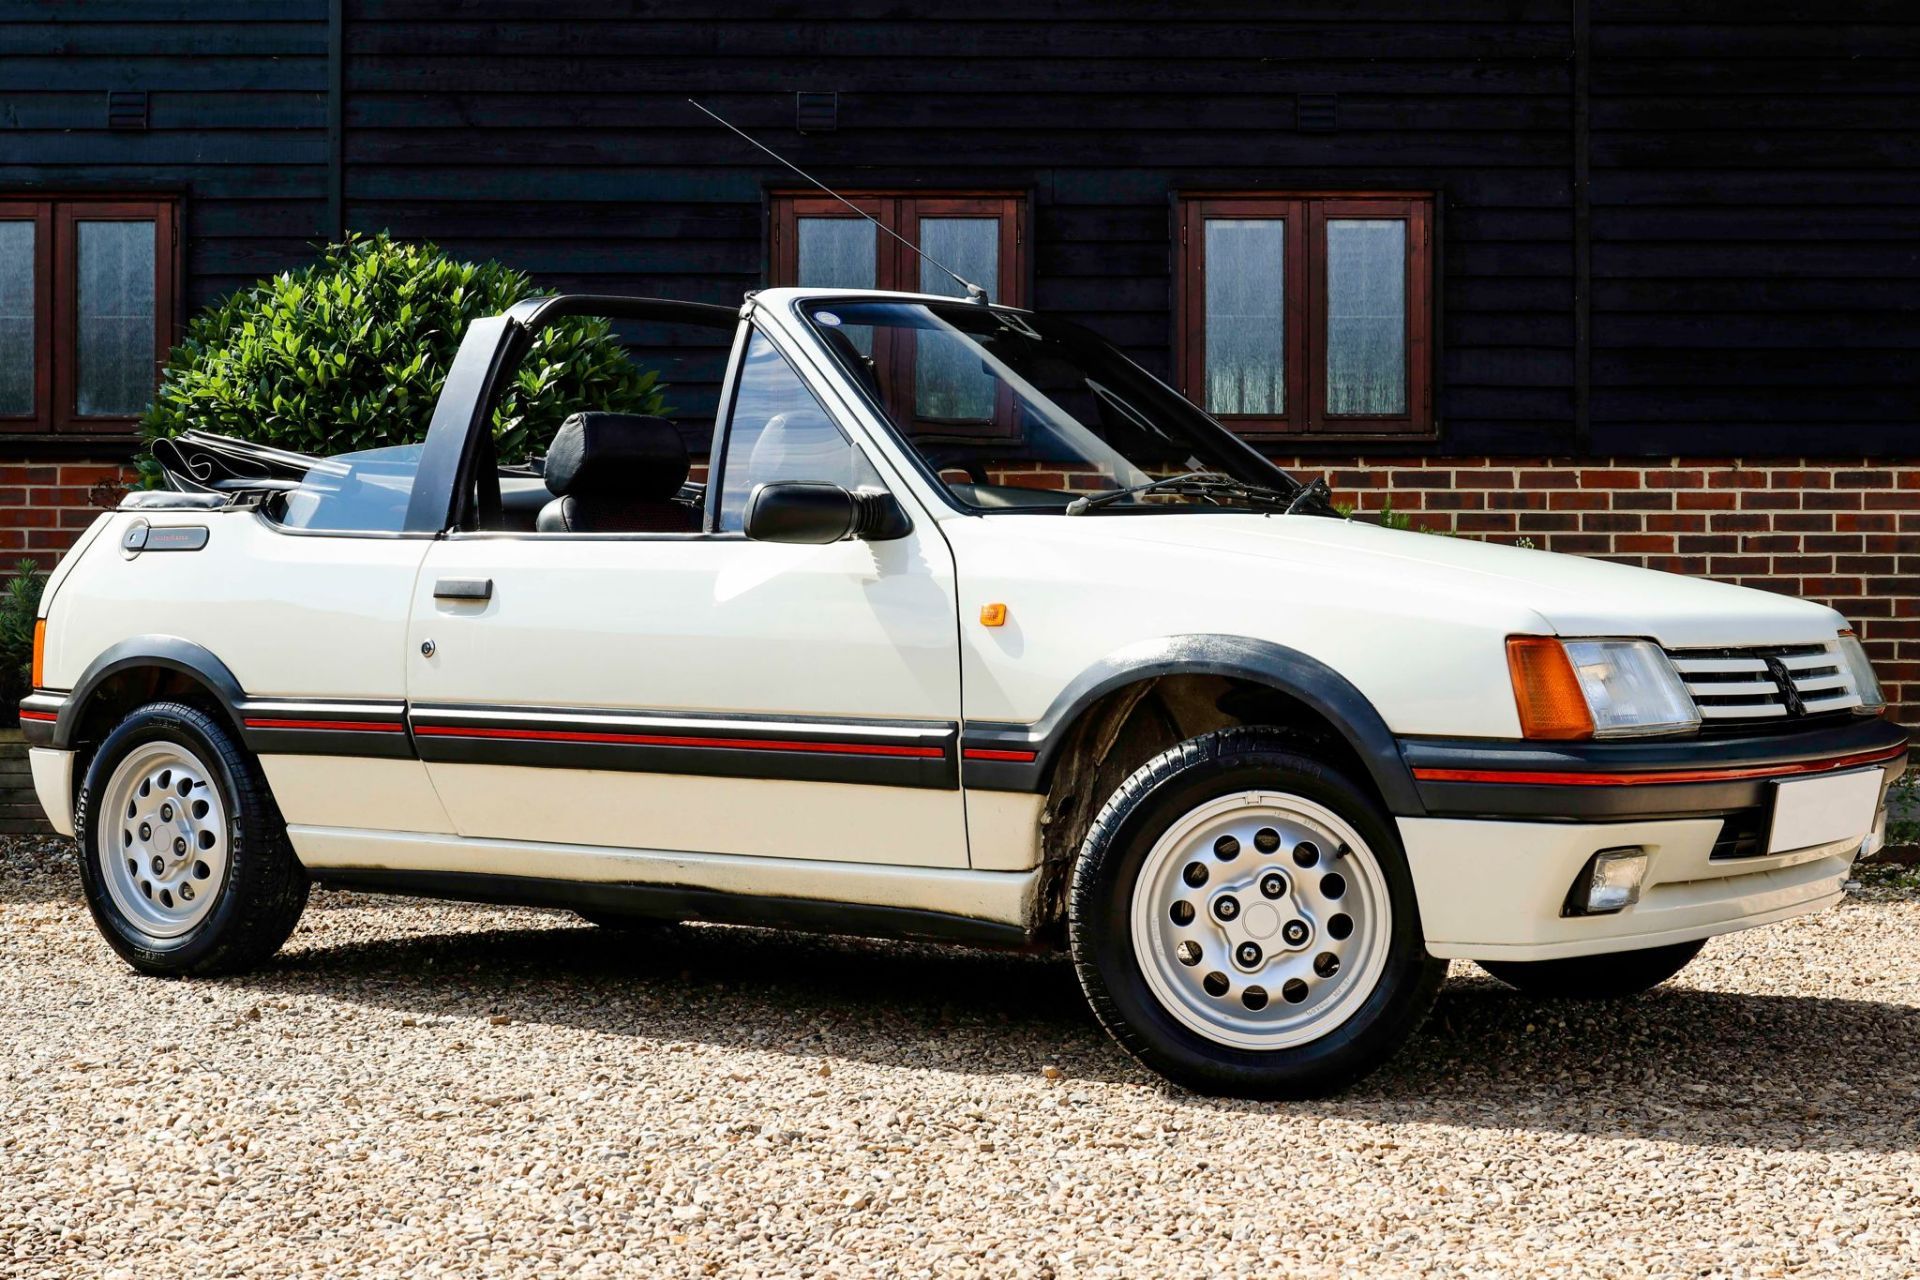 1989 PEUGEOT 205 CTI CABRIOLET CONVERTIBLE, 115hp, 1590cc PETROL ENGINE - OVER 30 SERVICES RECORDED